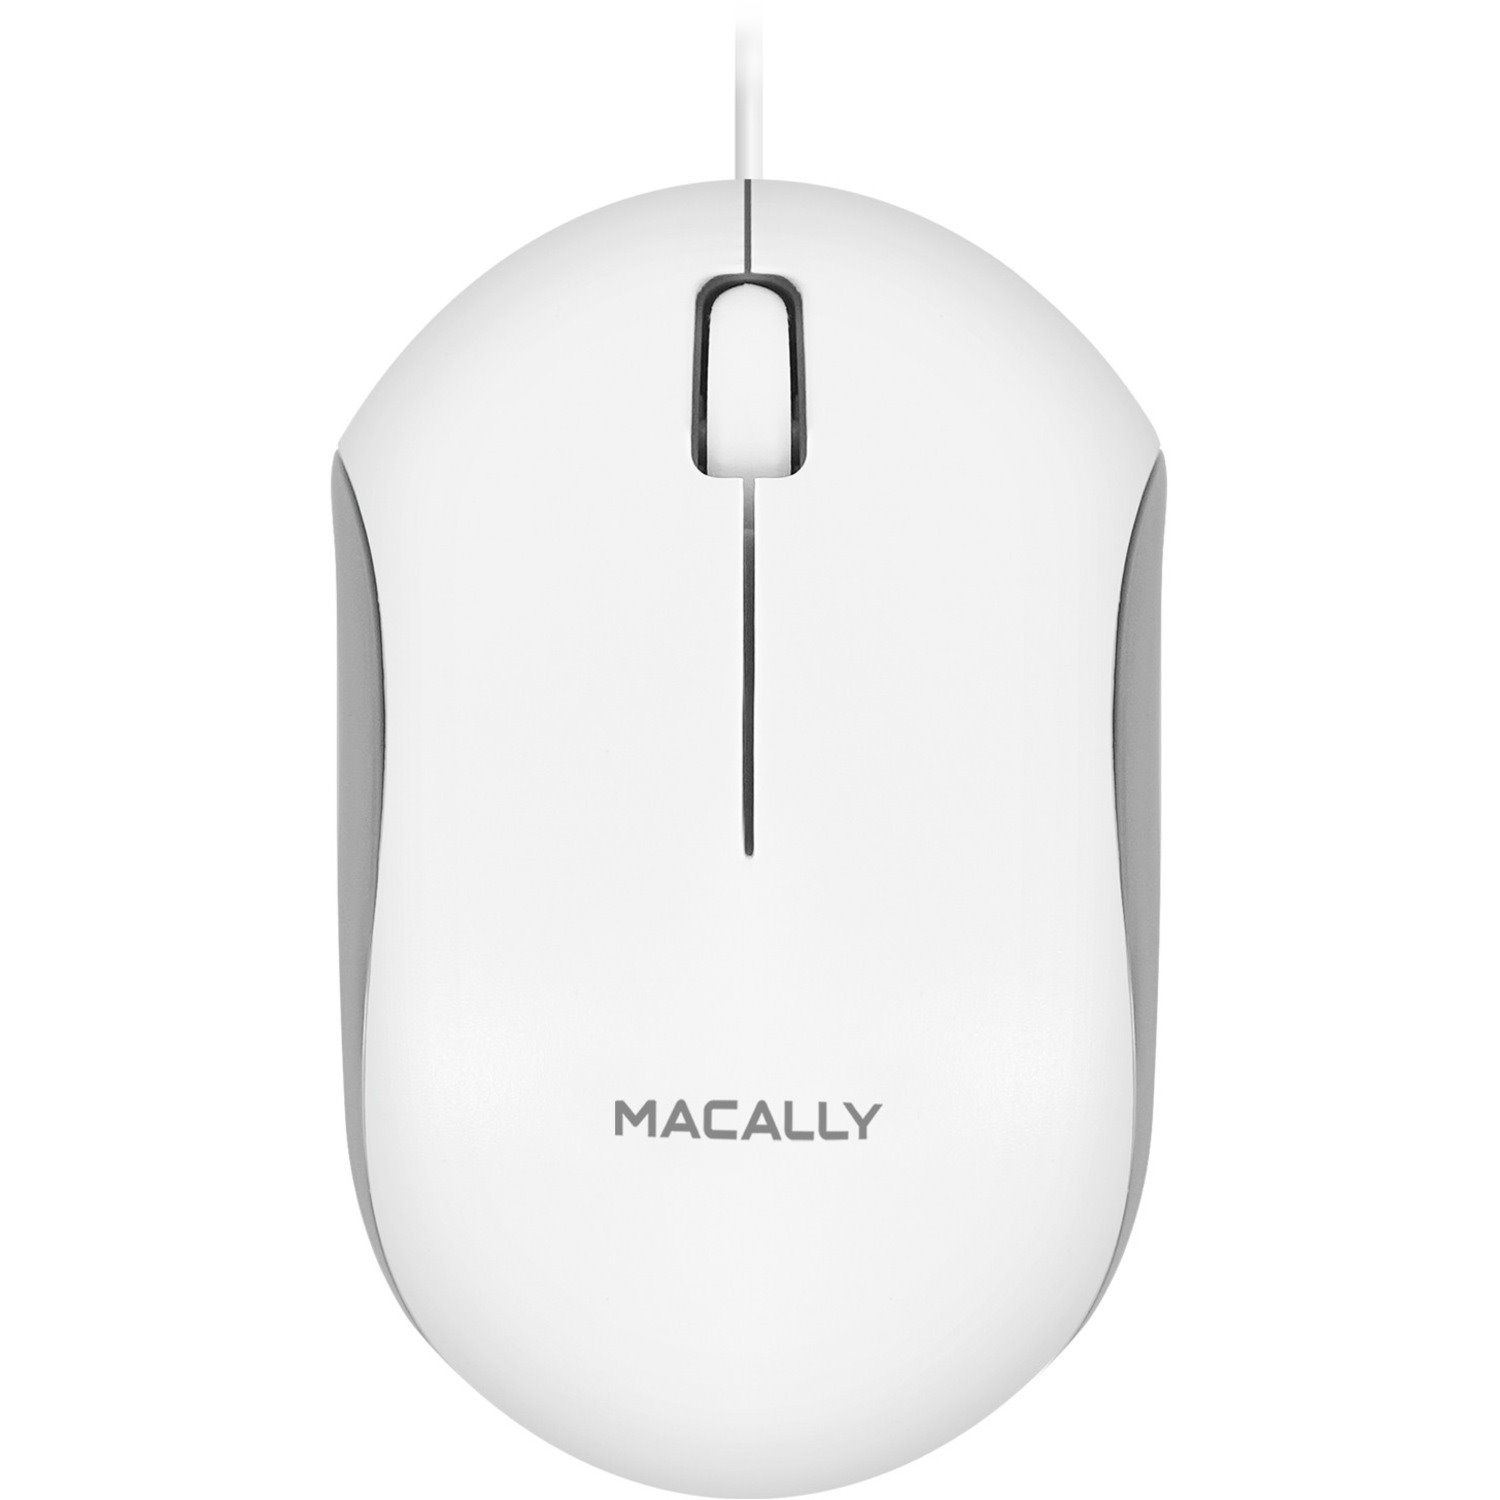 Macally White 3-Button USB Wired Mouse for Mac & PC (QMOUSE)